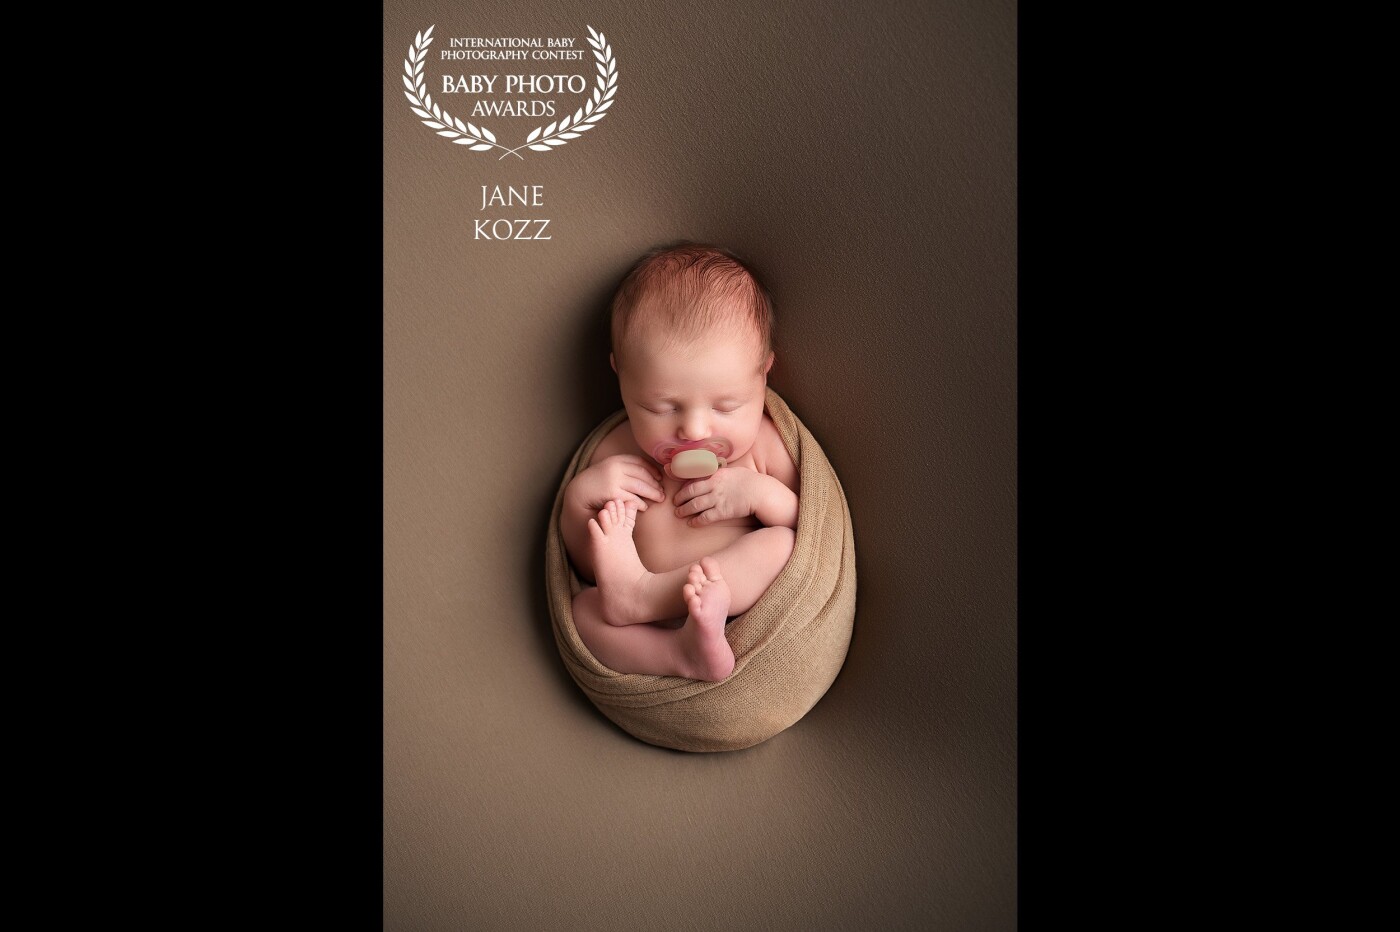 Minimalism in newborn photography. I like it because you see a baby with wrap only. It looks like a baby inside the mom's stomach. So natural and beautiful.